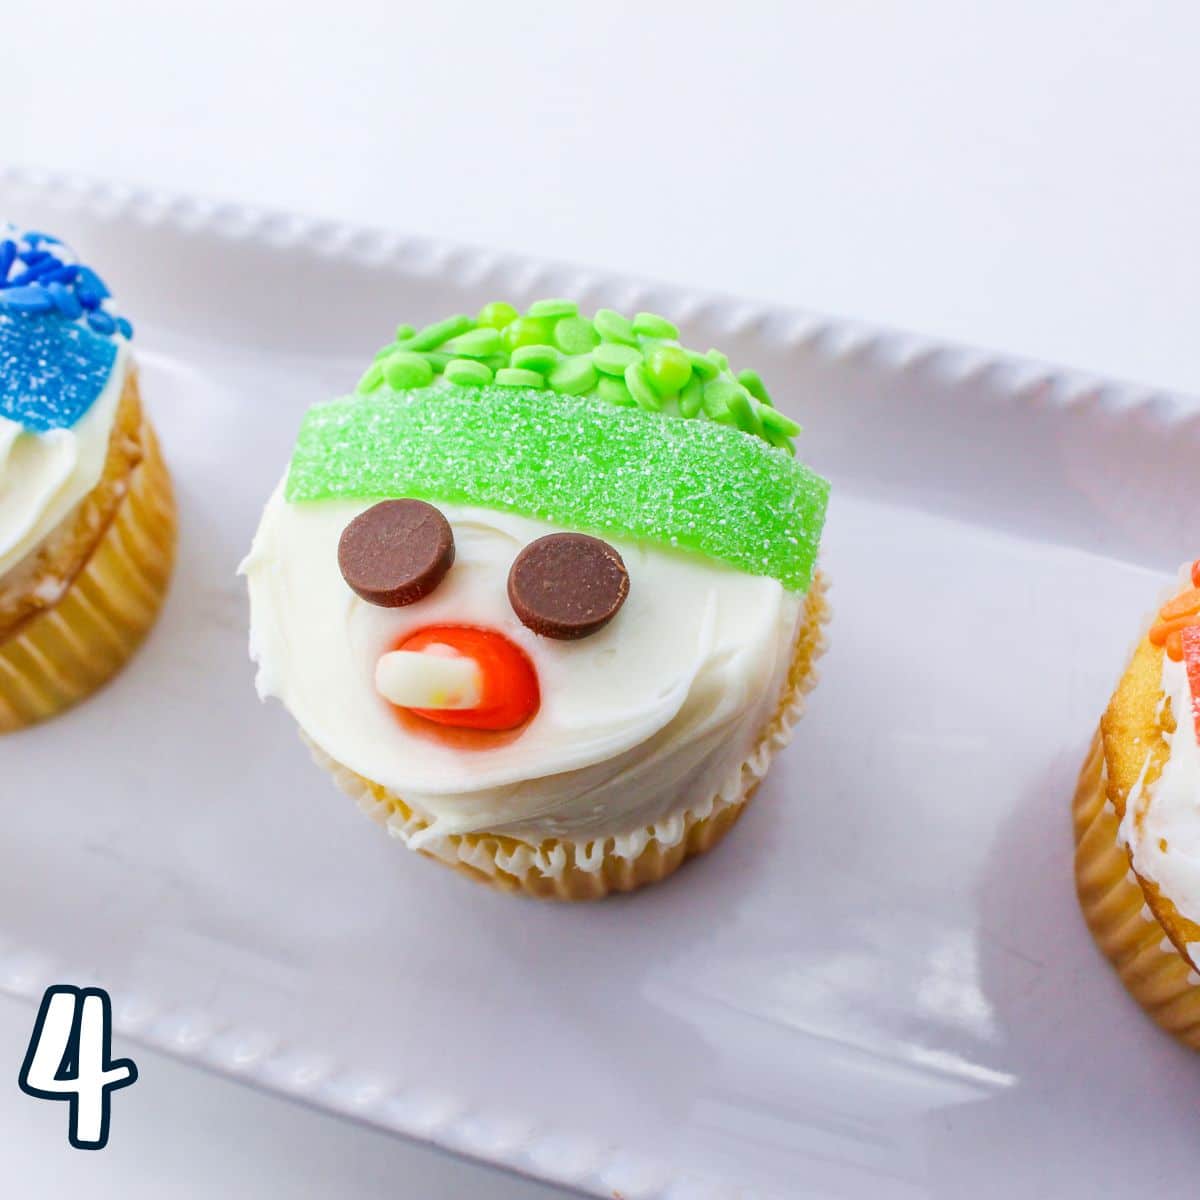 Snowman cupcakes displayed on a white plate.